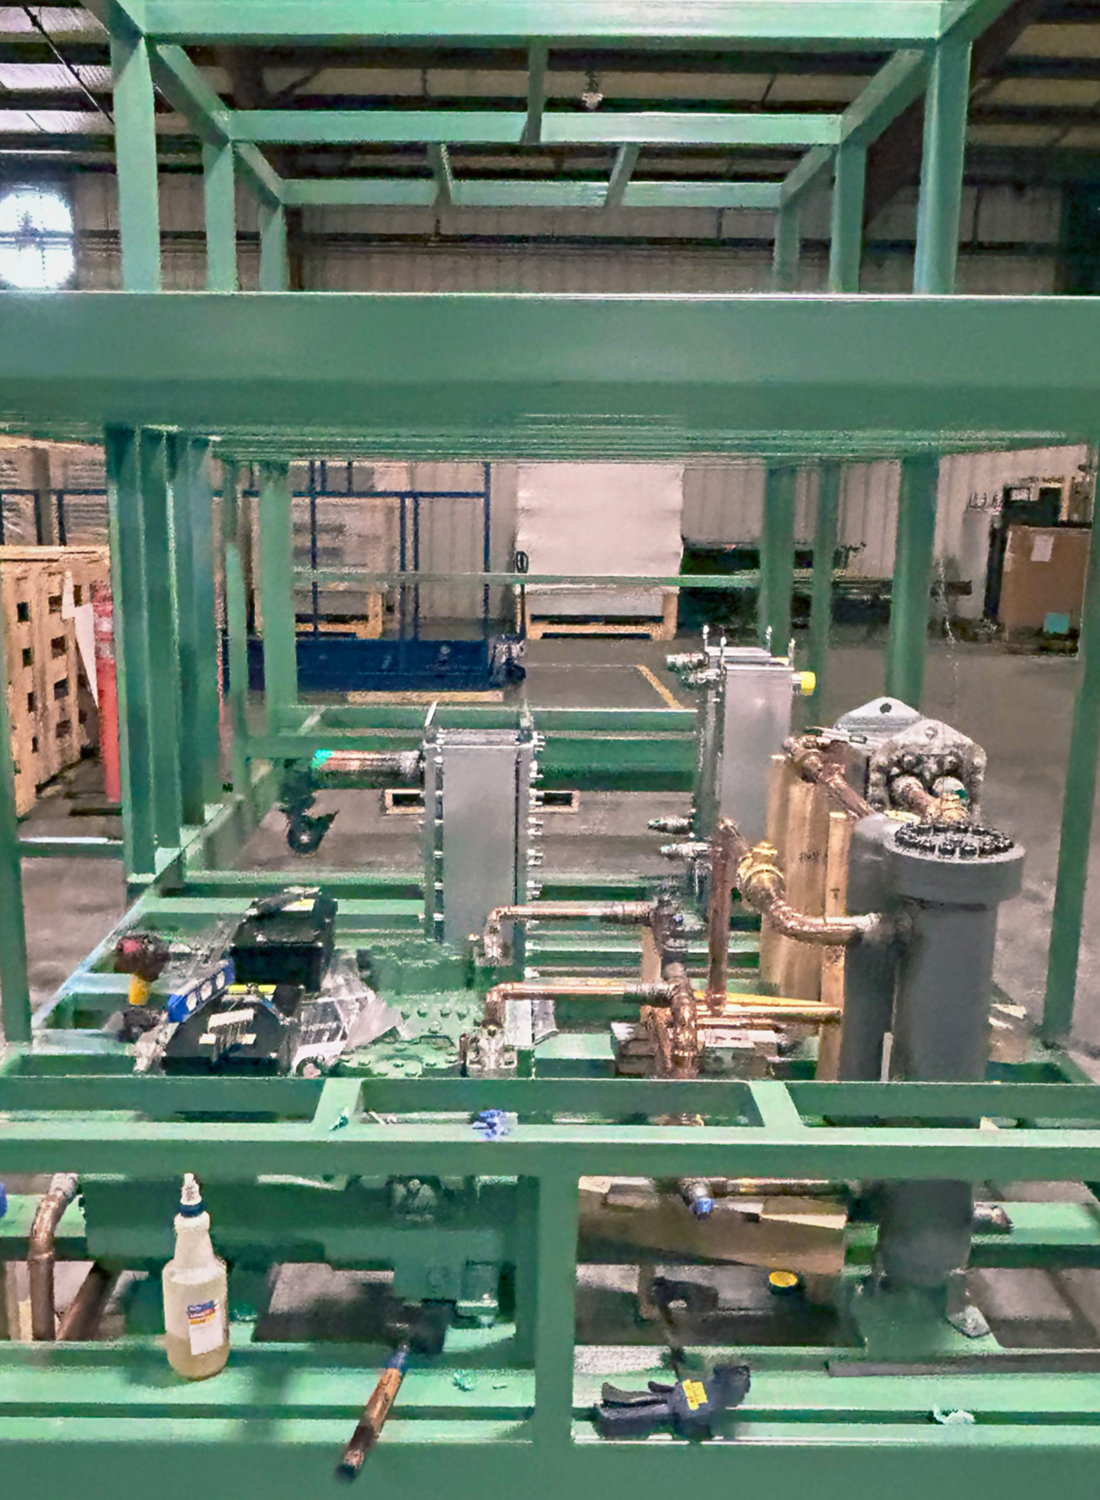 PRO begins production on Southern Distilling's new PROGreen Solutions chiller system